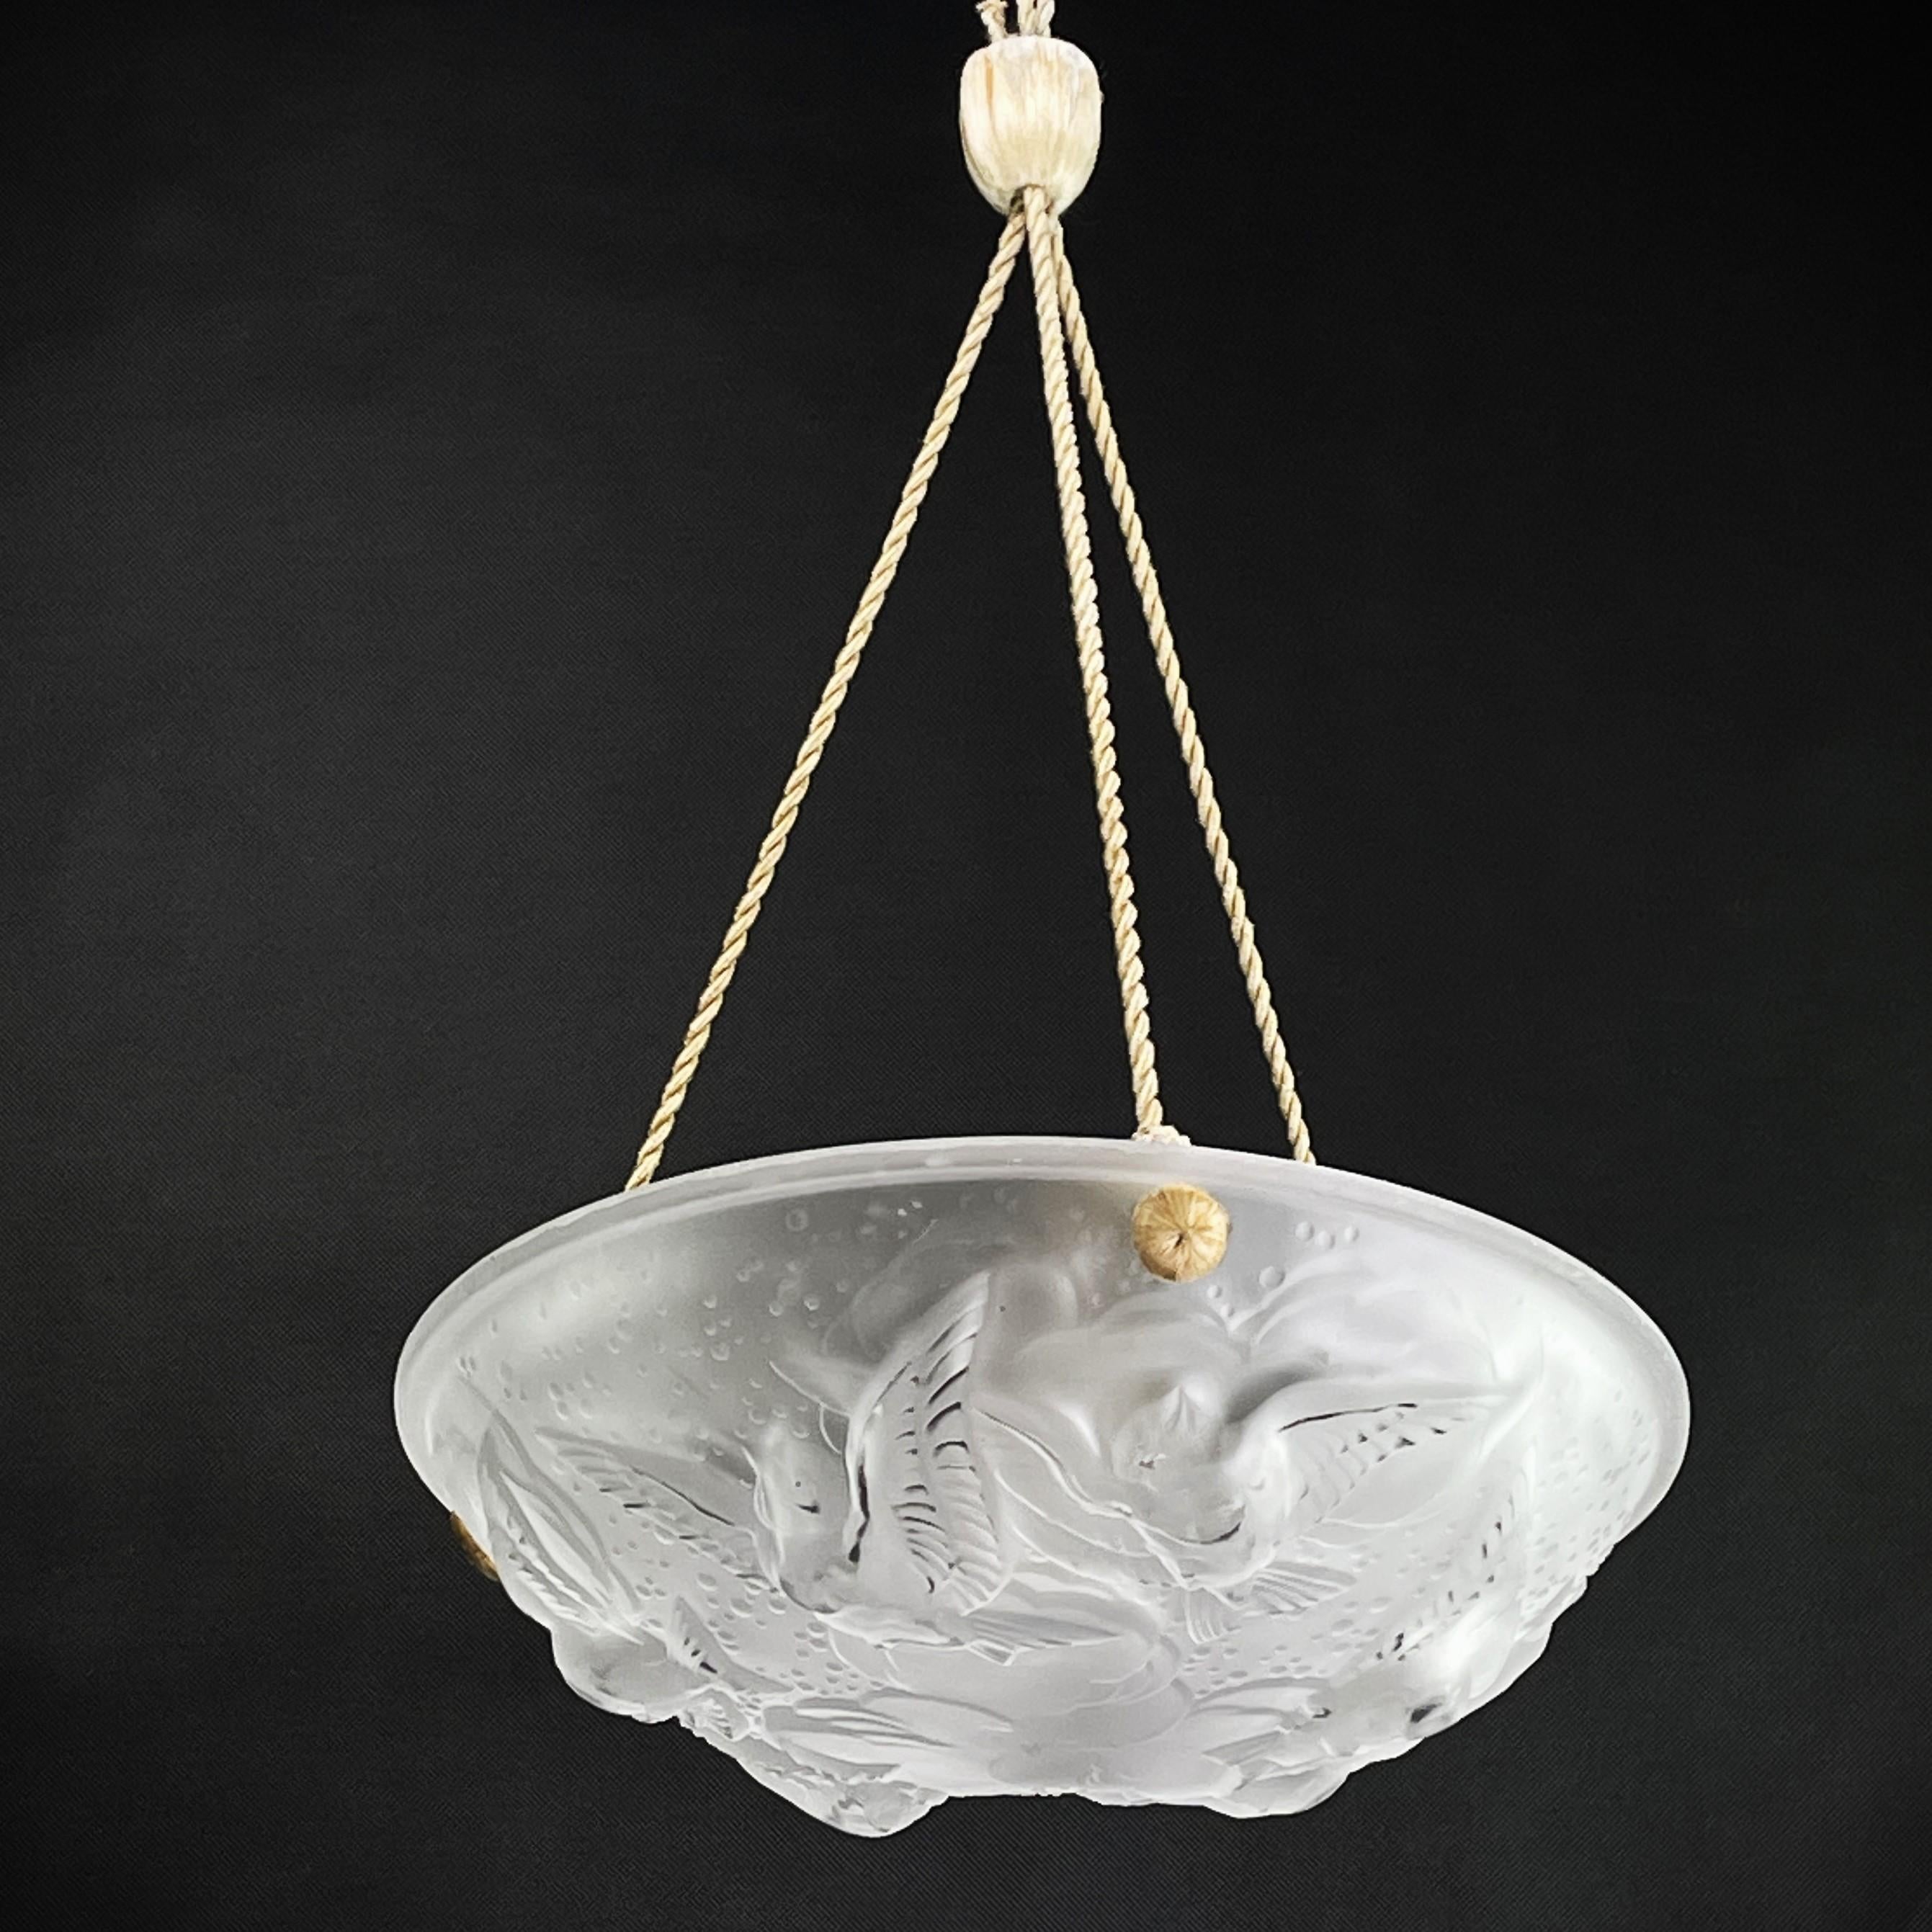 1 Art Deco lamp  

The ART DECO ceiling lamp is a remarkable example of early 20th century craftsmanship and style. 

The signed ceiling lamp is a sign of the outstanding craftsmanship and quality for which this renowned company is known. Muller